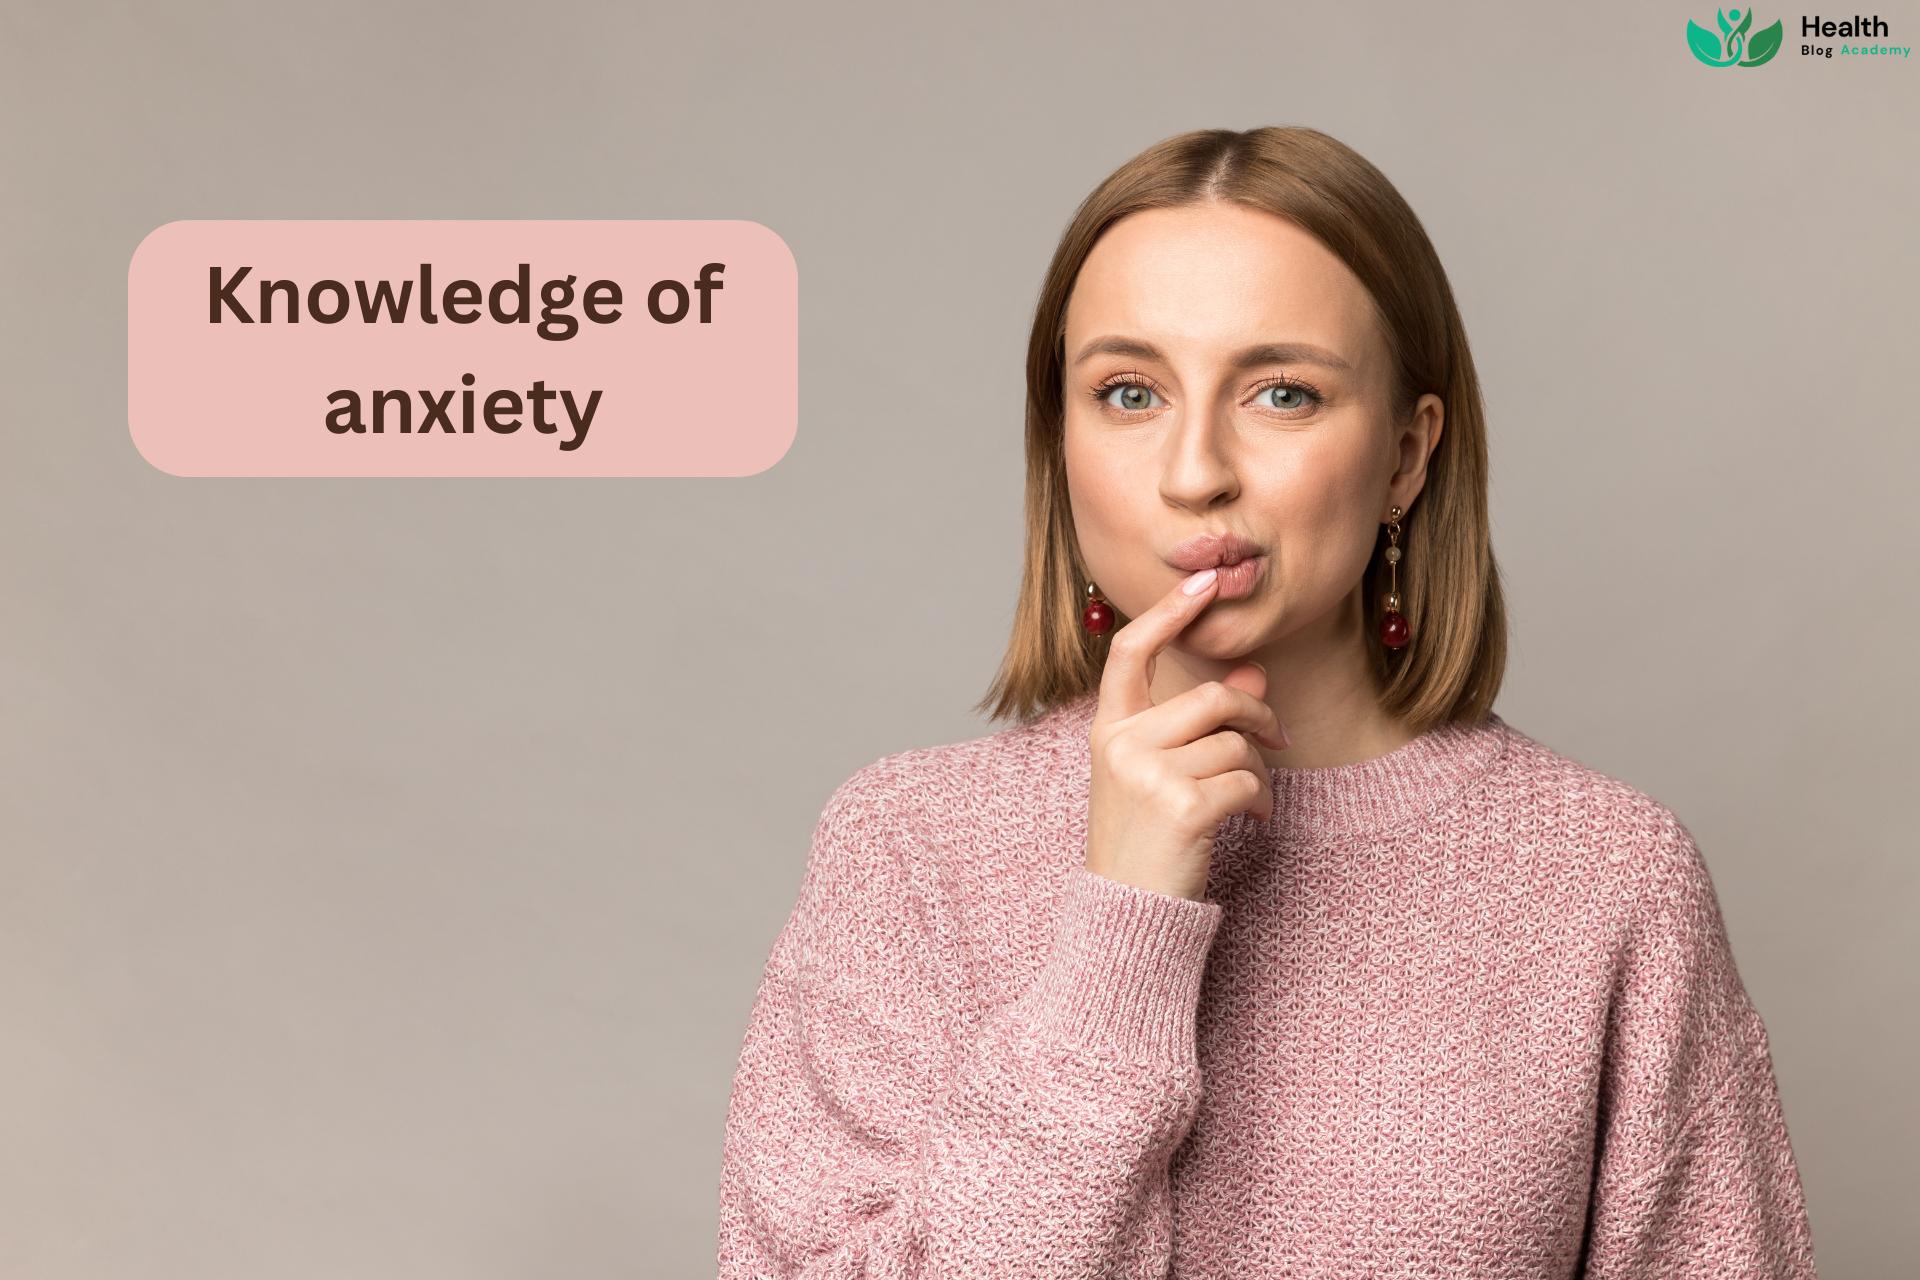 Knowledge of anxiety